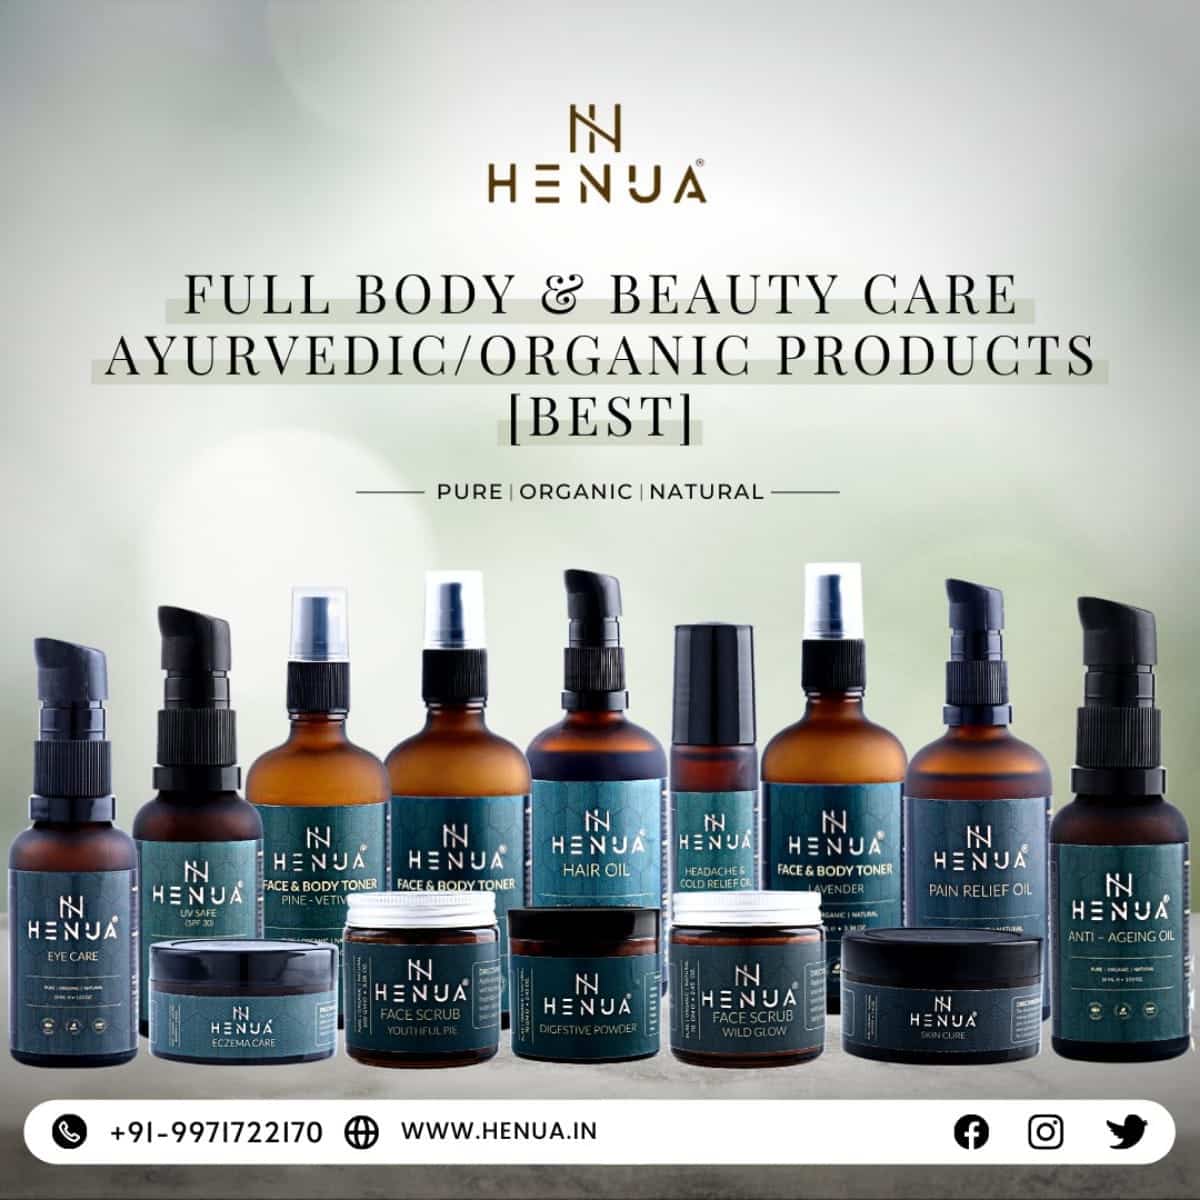 Full body care and beauty care ayurvedic and organic products